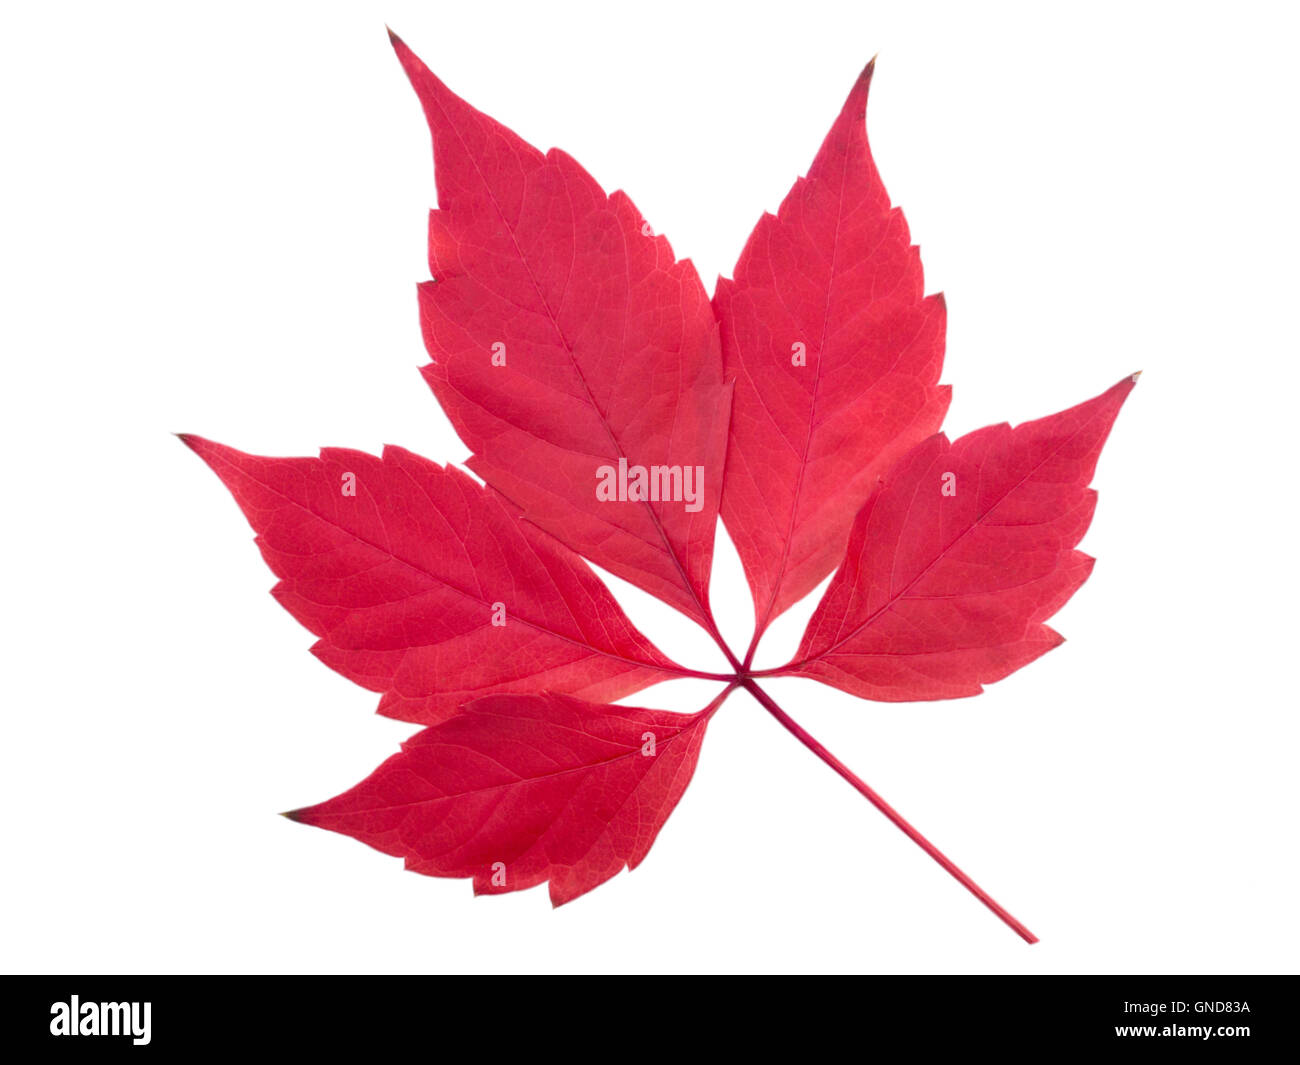 Bright red parthenocissus leave isolated on white Stock Photo